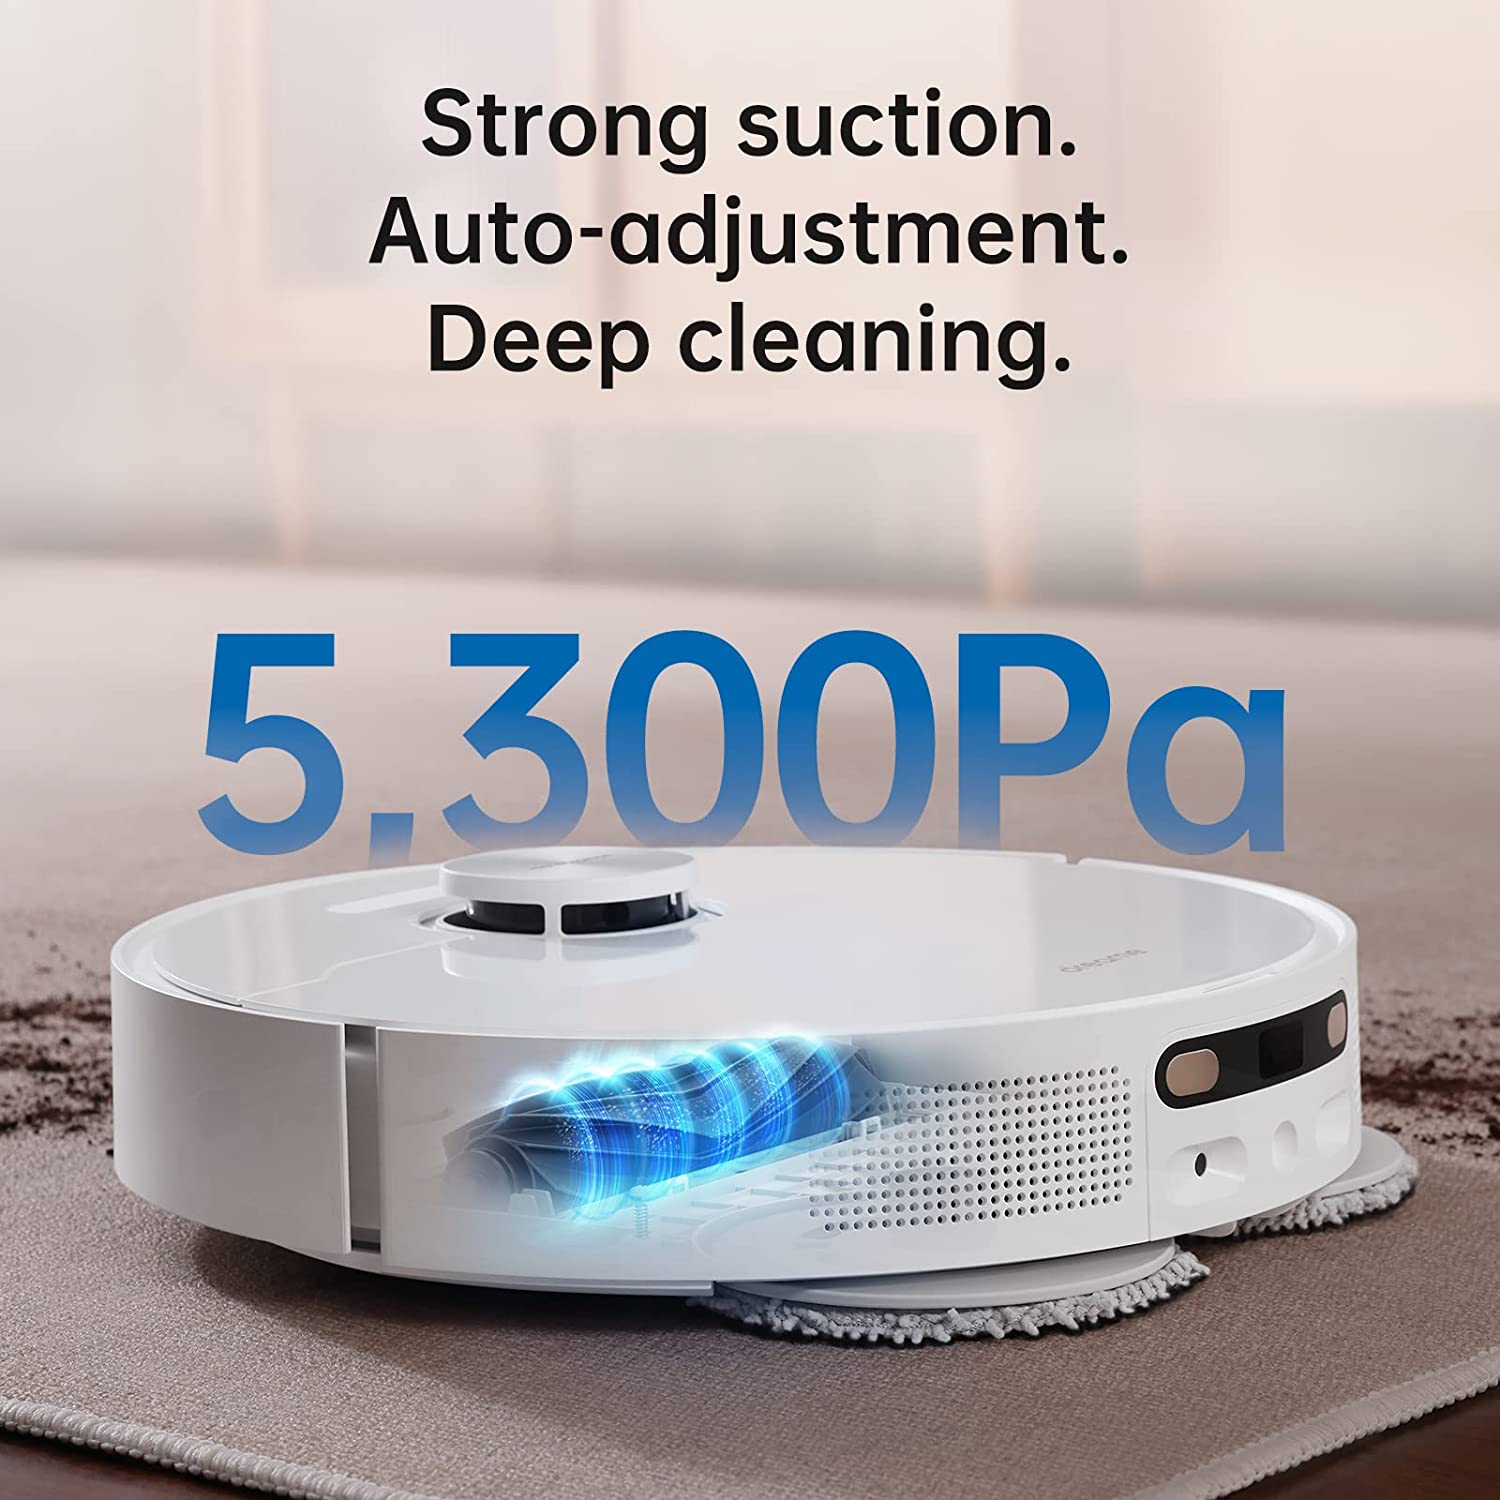 Dreametech L10s Ultra Robot Vacuum and Mop Combo, Auto Mop Cleaning and Drying, Self-refilling and Self-Emptying Base for 60 Days of Cleaning, 5300Pa Suction and AI Navigation, Compatible with Alexa